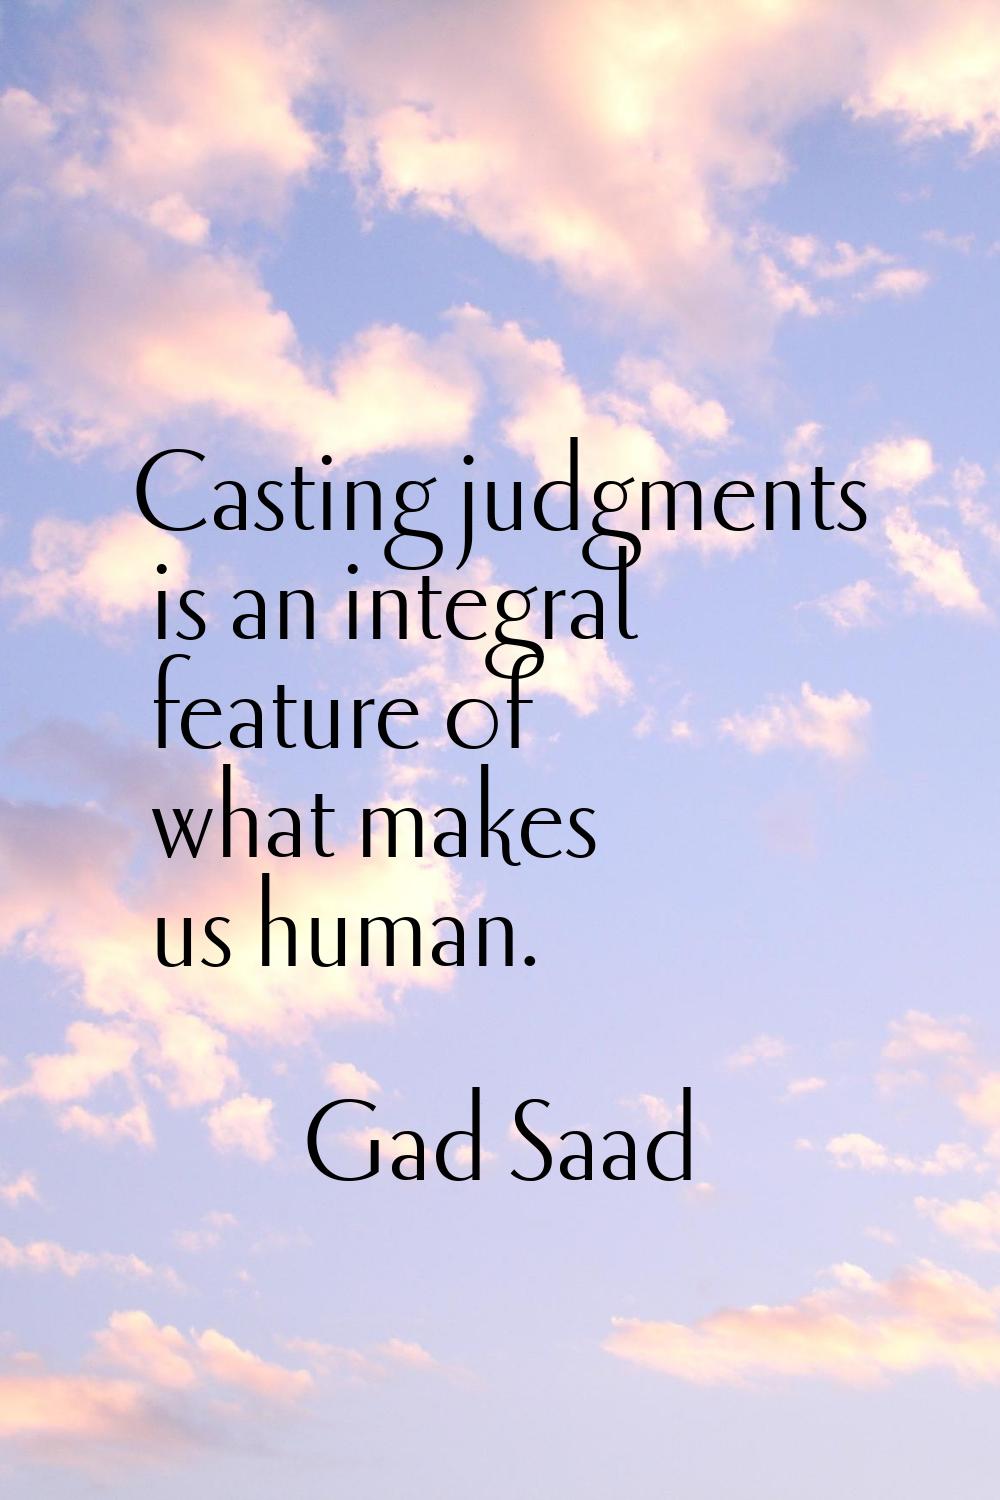 Casting judgments is an integral feature of what makes us human.